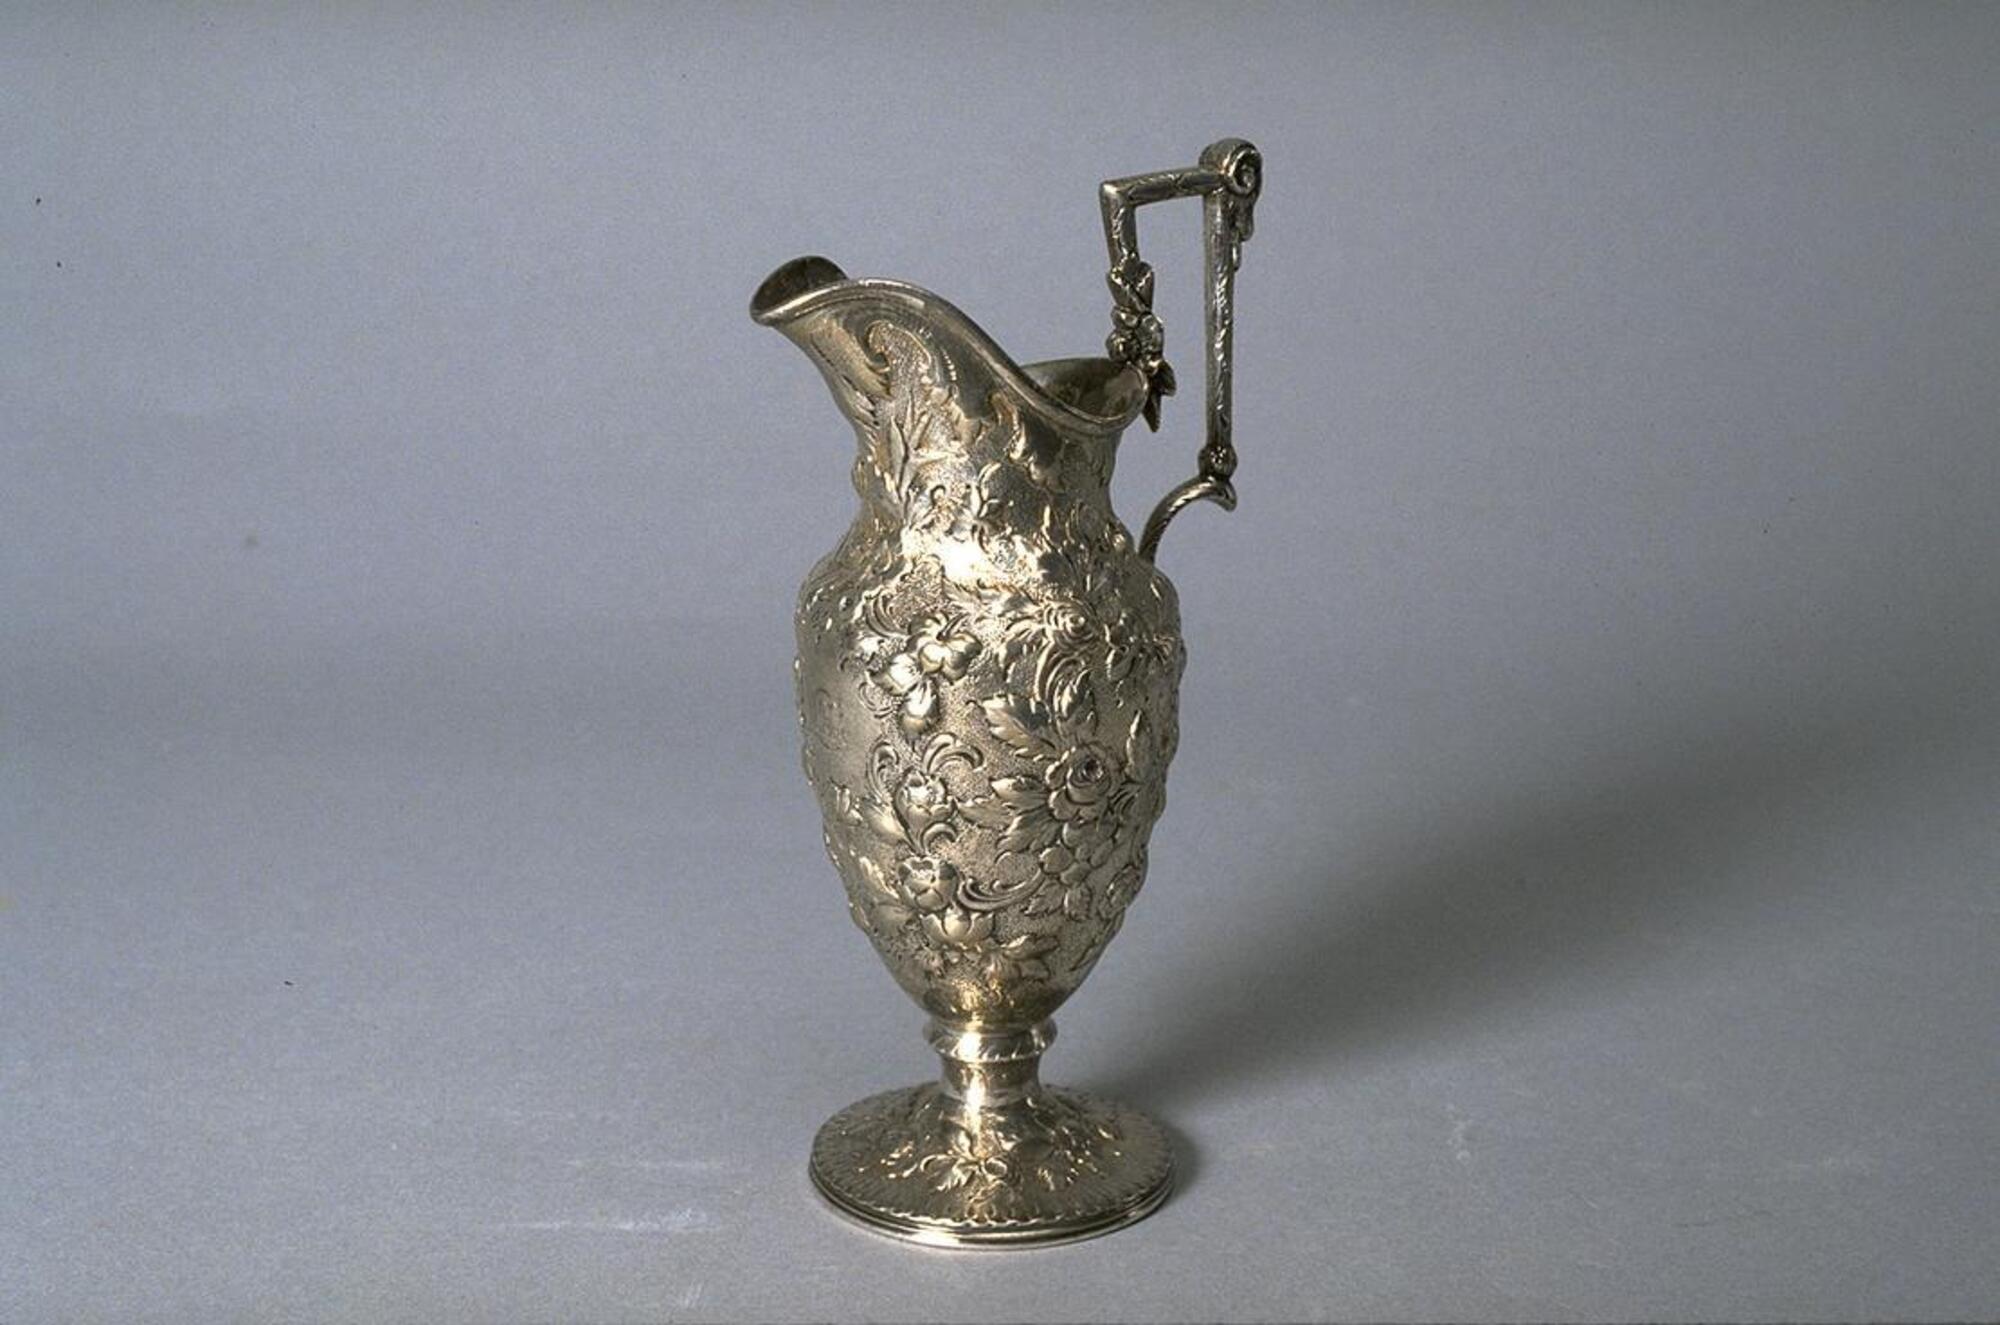 Pitcher-shaped silver vessel with square handle and opulent repouss&eacute; decoration